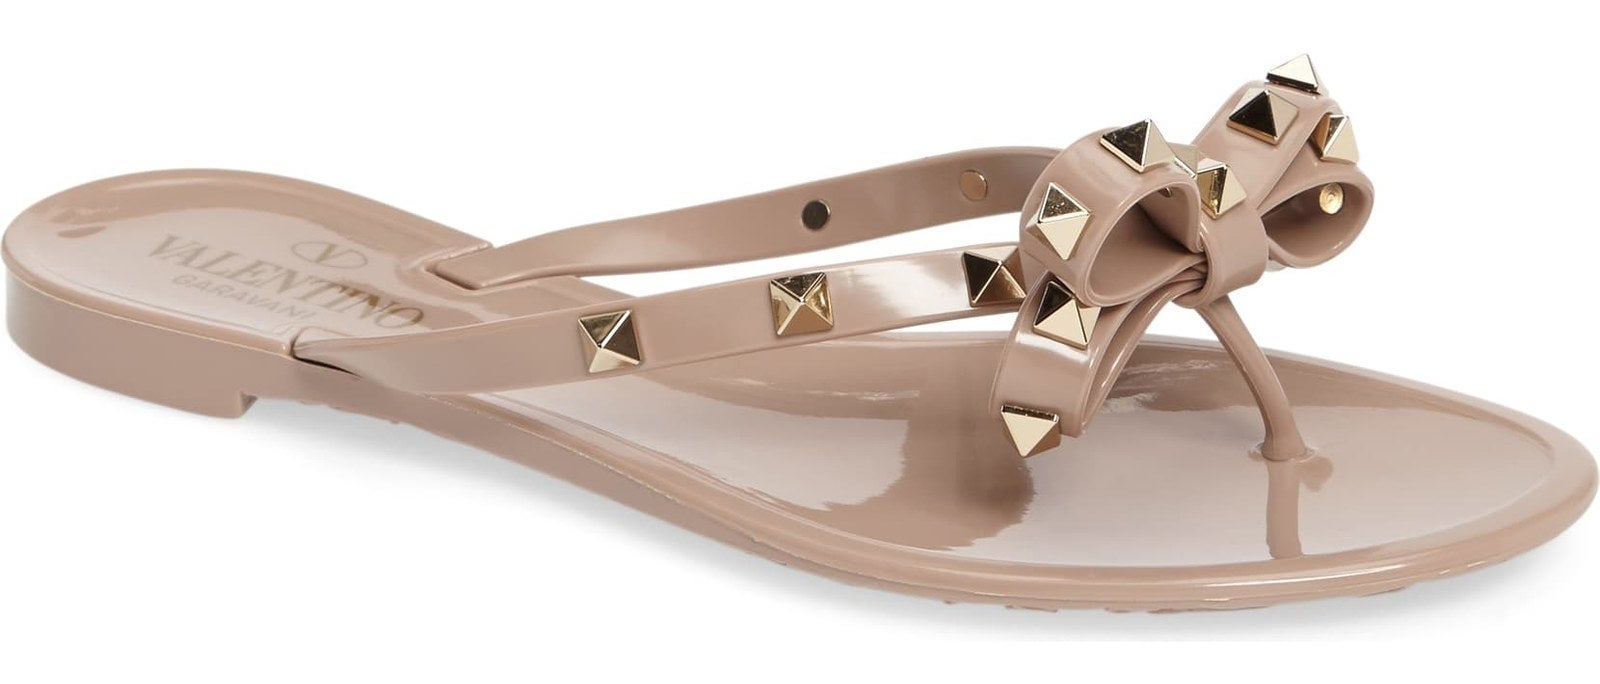 The Valentino Rockstud Jelly Thong in blush.